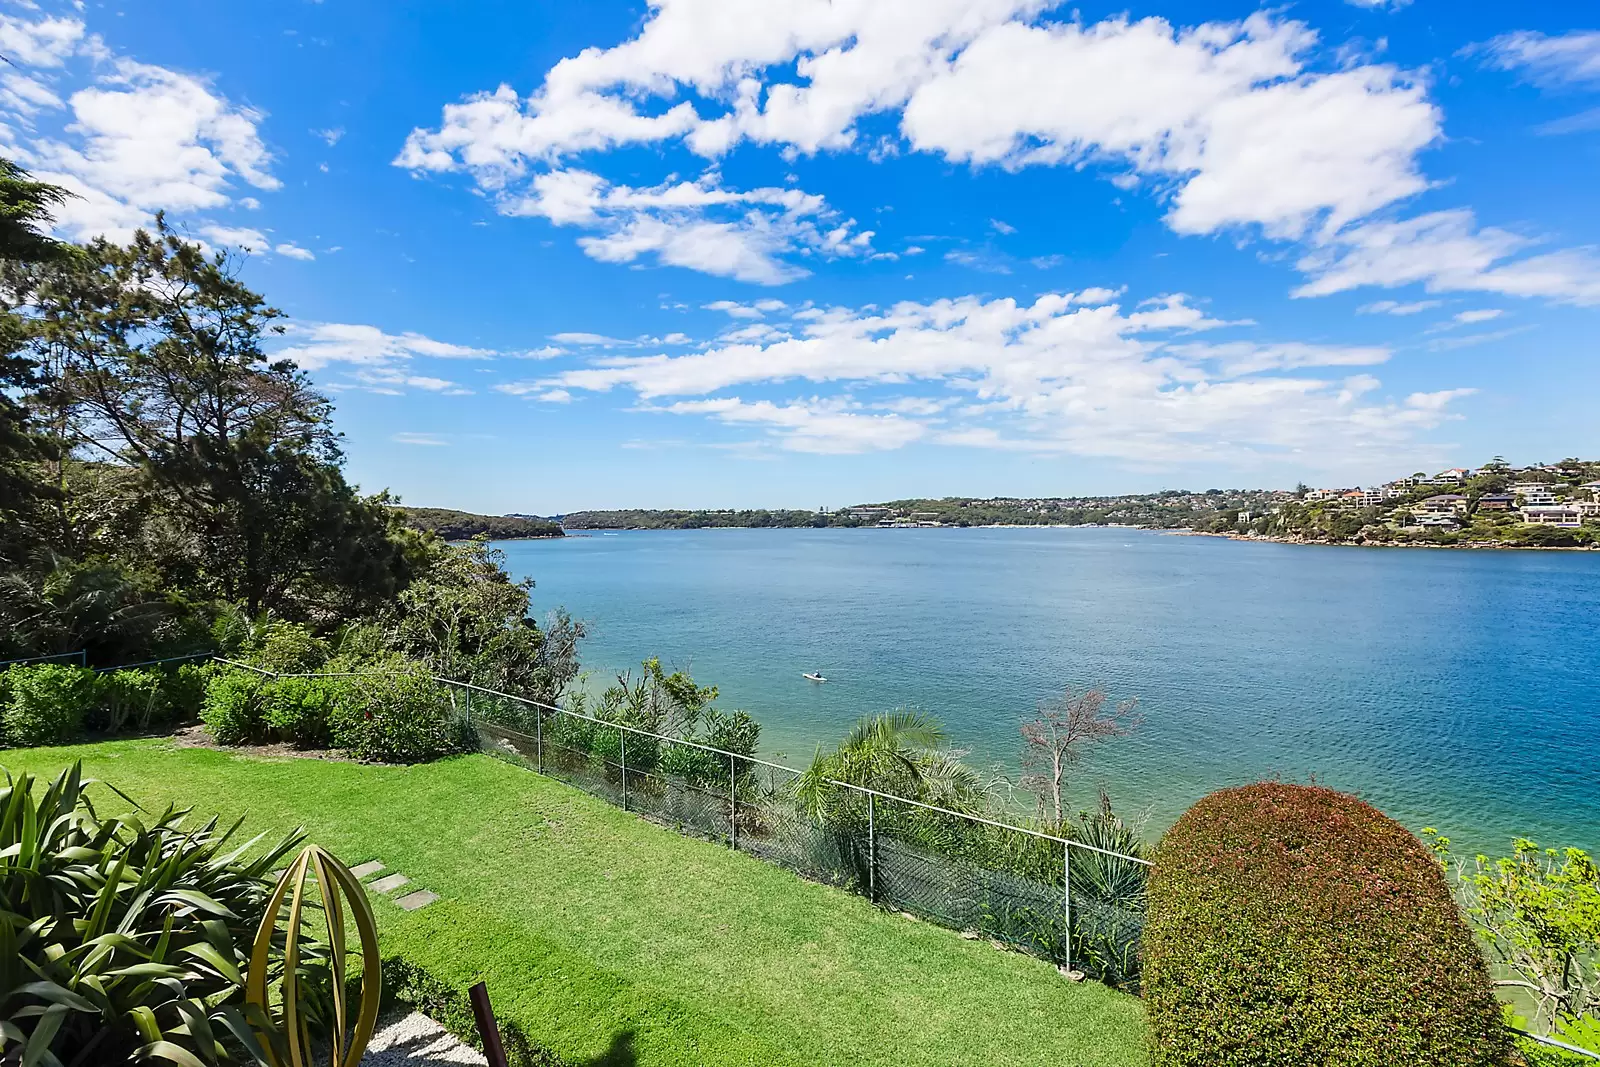 Photo #19: 1-3 Amiens Road, Clontarf - Sold by Sydney Sotheby's International Realty